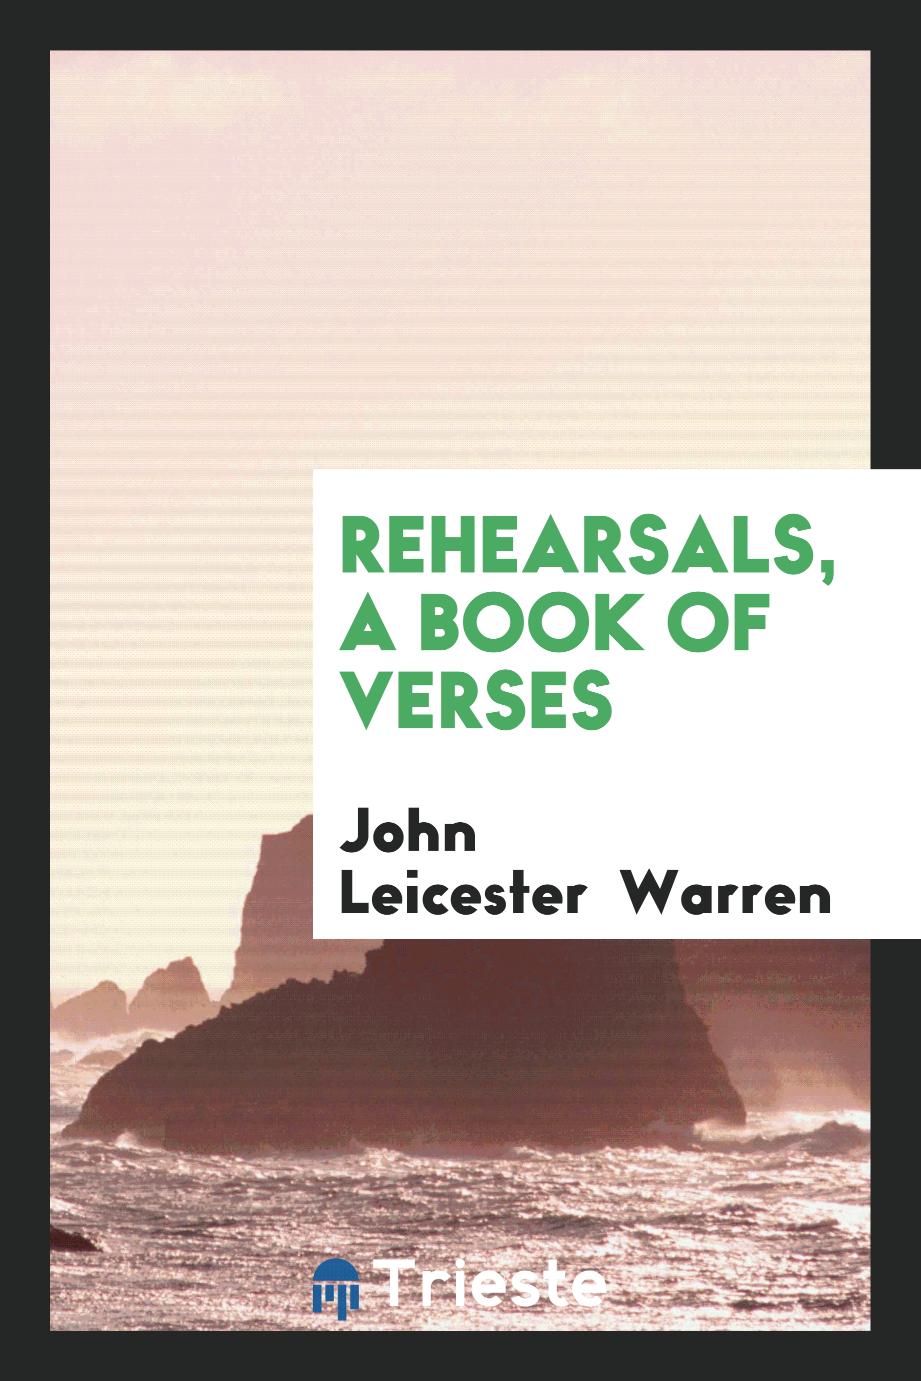 Rehearsals, a book of verses